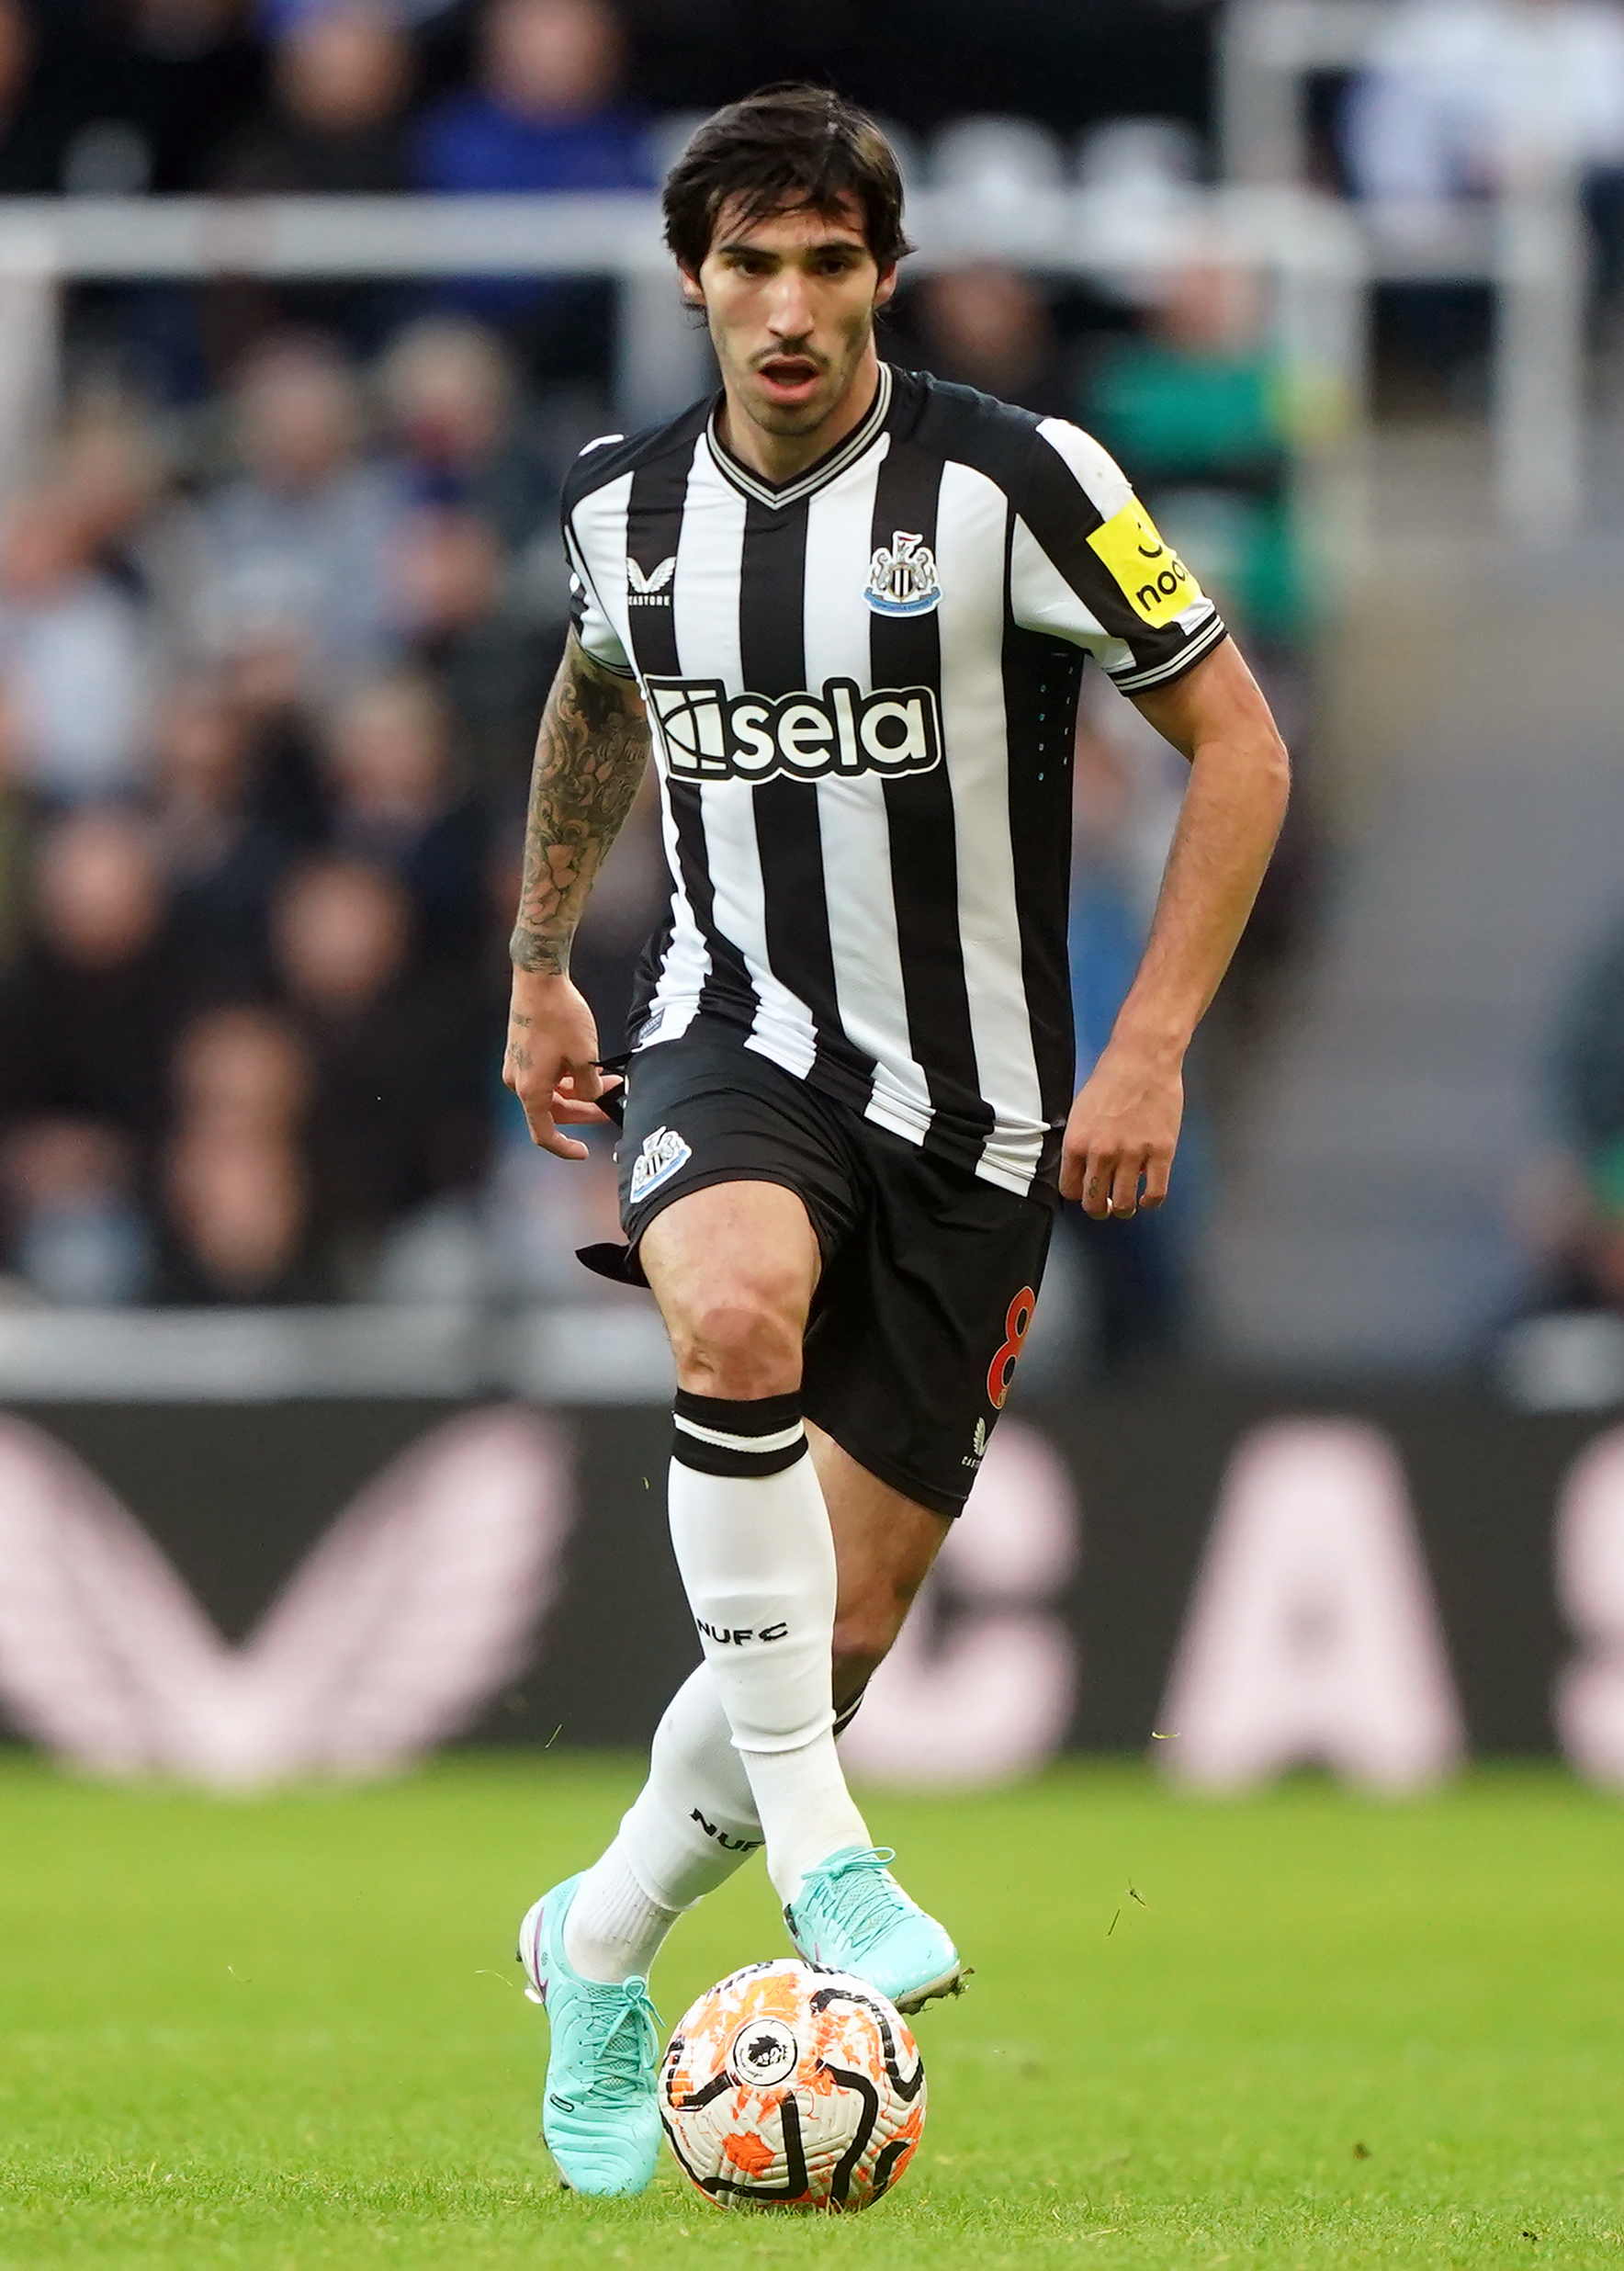 Newcastle midfielder Sandro Tonali has been banned for 10 months over breaches of betting regulations